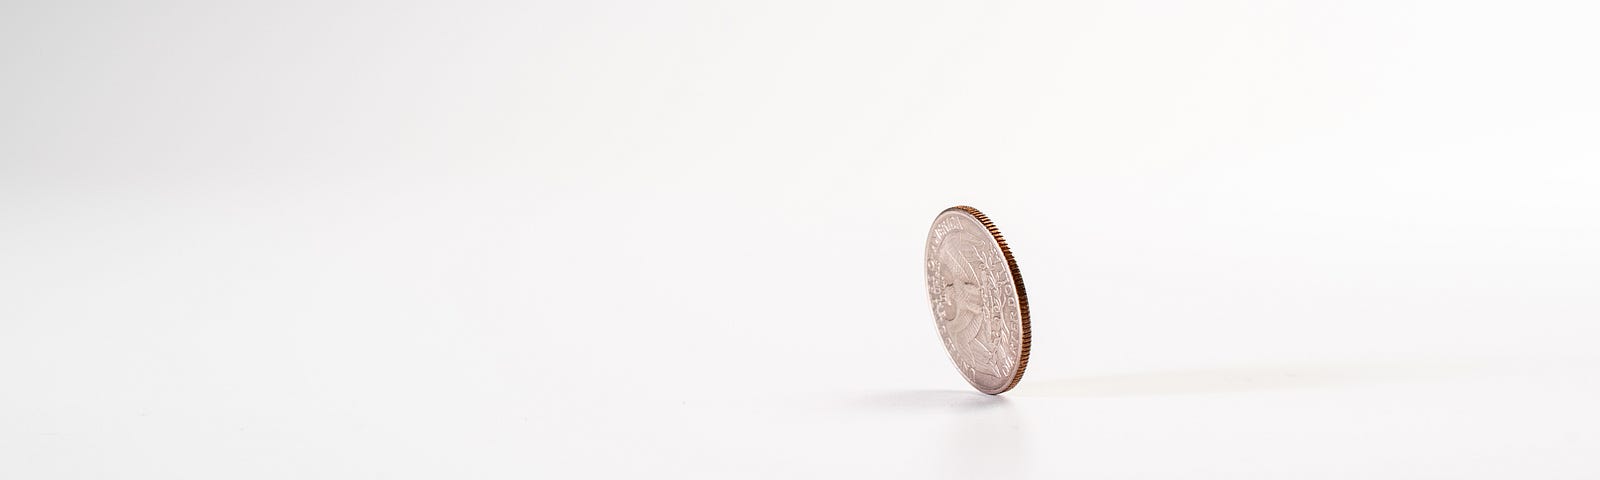 coin sitting on edge about to fall over